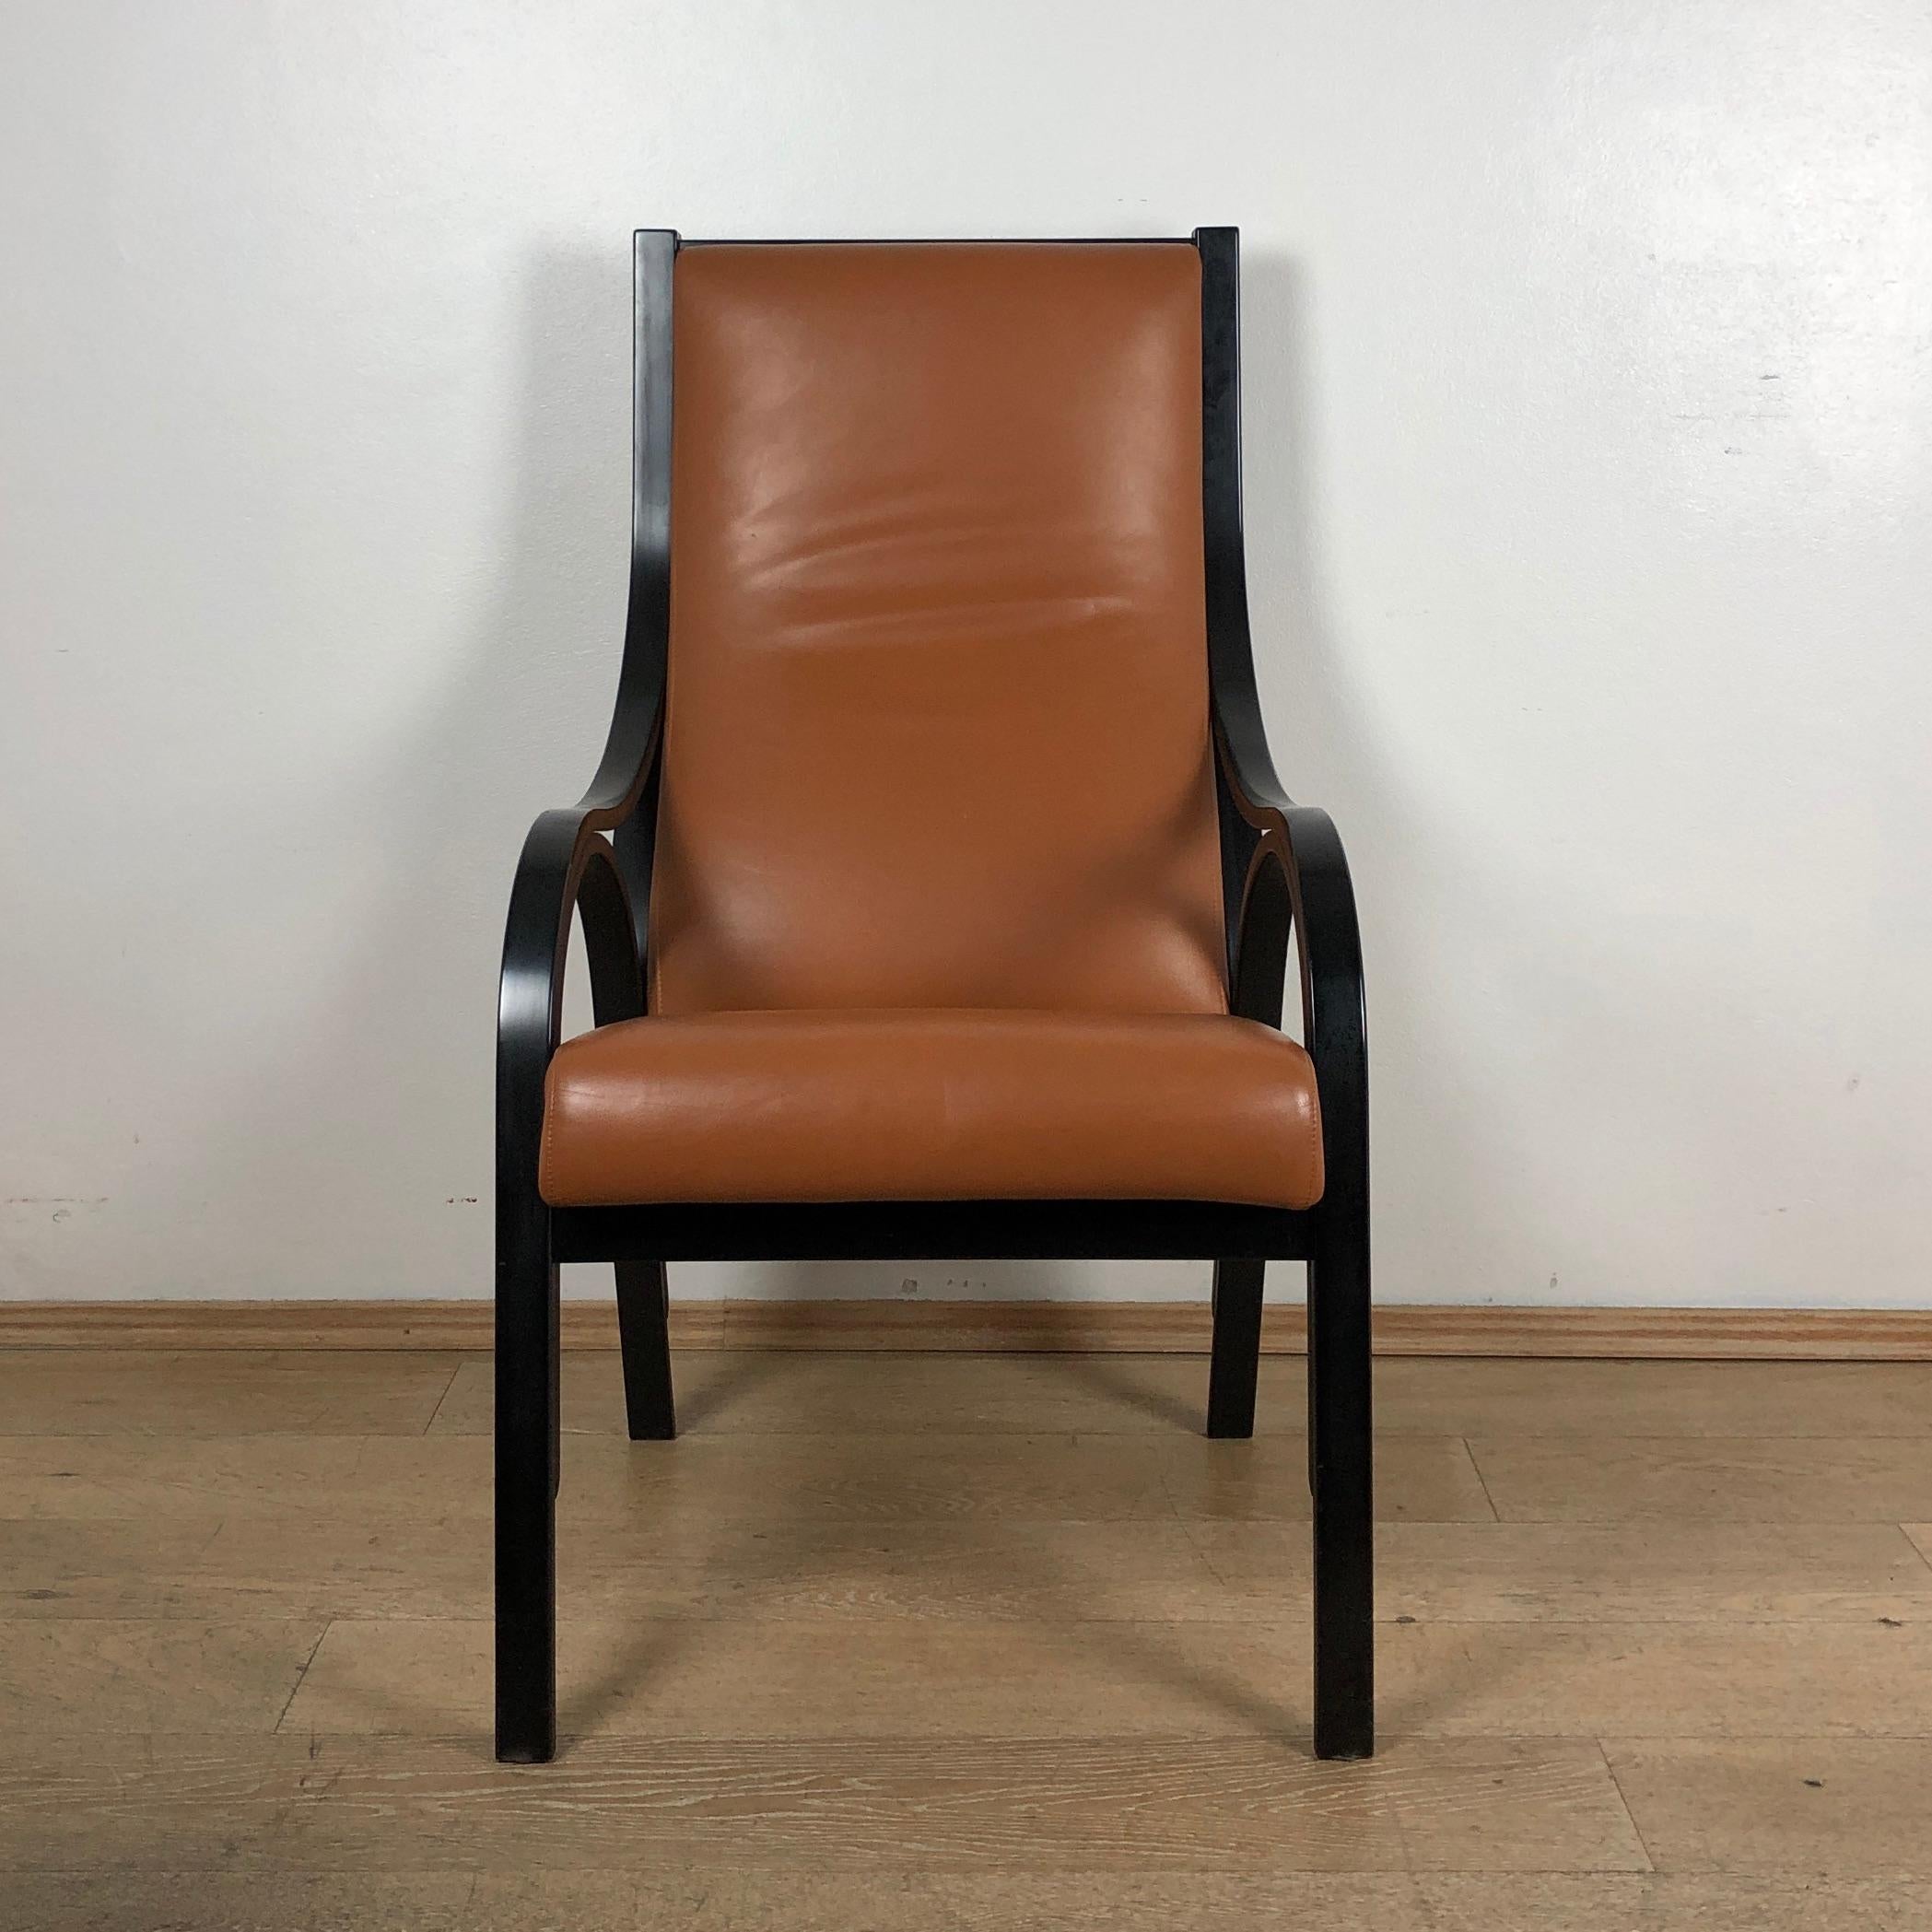 Armchair from 1980s period produced by Poltrona Frau. Structure in curved black lacquered walnut . Backrest and seat shell in beech with polyurethane foam padding upholstered in Pelle Frau® leather . Brand name is found under the seat. This model of